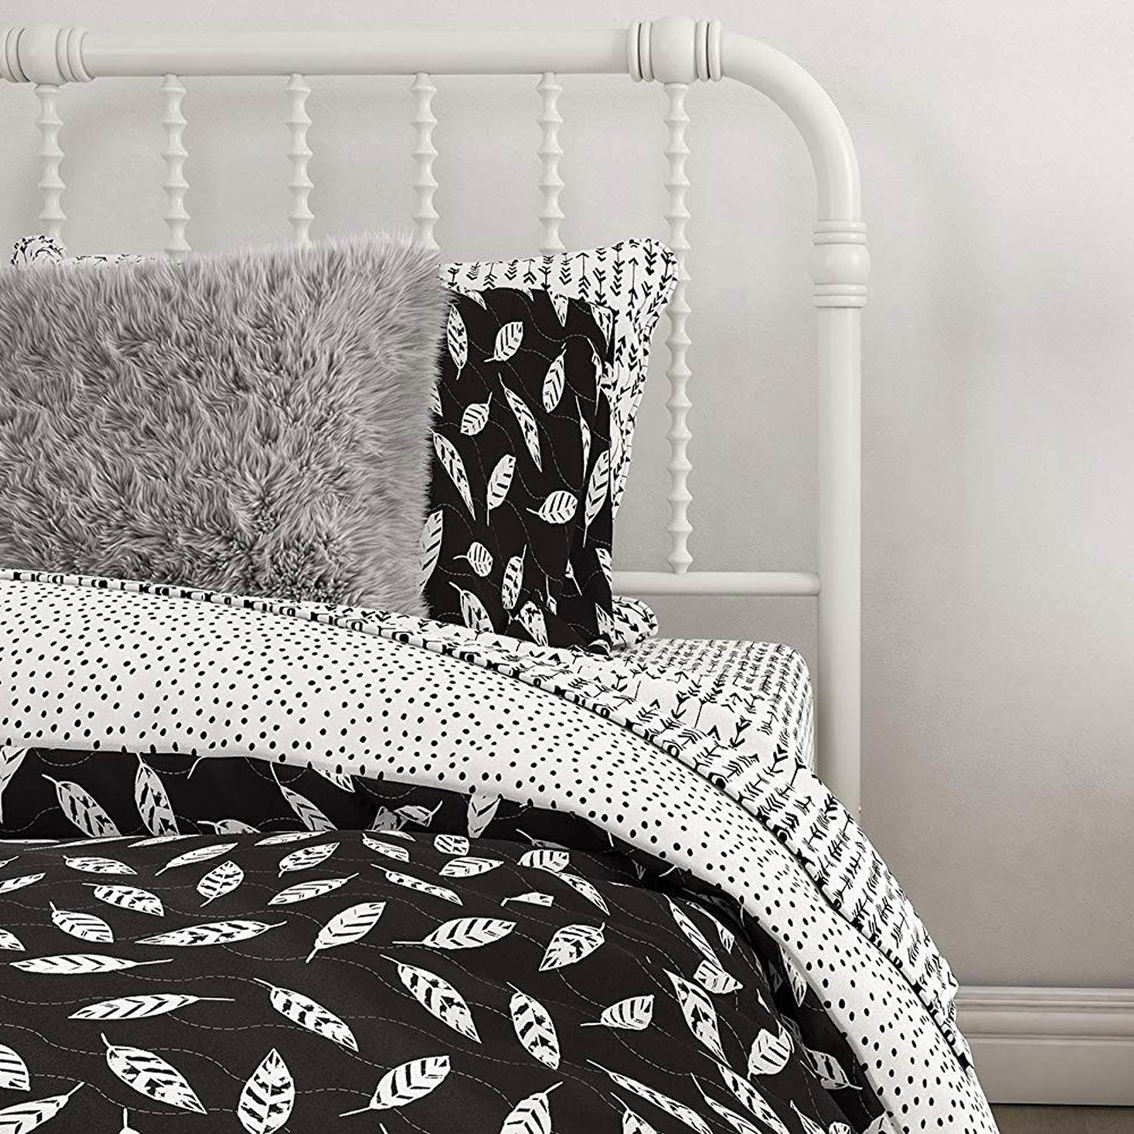 Little Seeds Feathers 5 pc. Bedding Set - Image 5 of 6